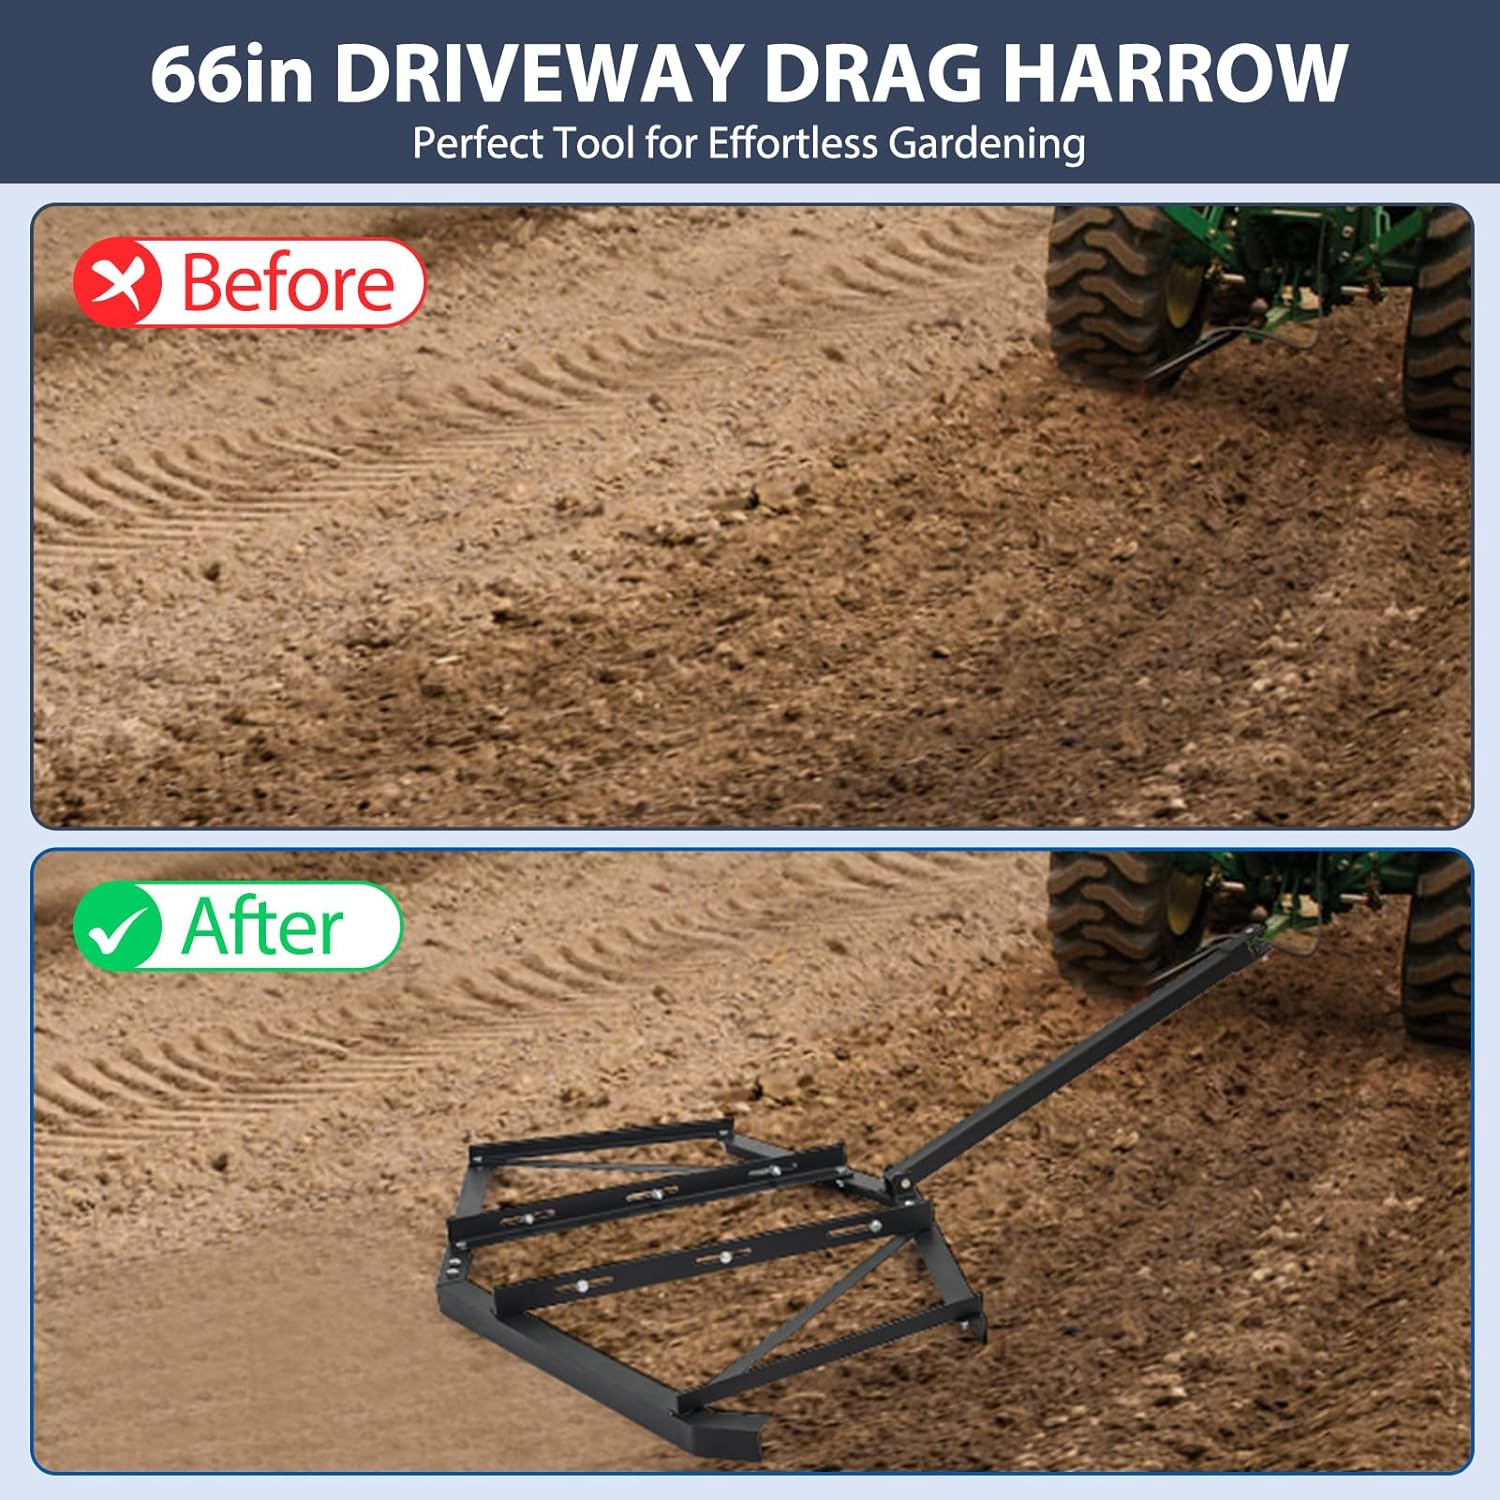 GARVEE 74 Inch Width Driveway Drag with 3 Sets Adjustable Bolts & 2 Reinforcement Bars, Tow Behind Drag Harrow with Pin-Style Hitch for ATVs UTV